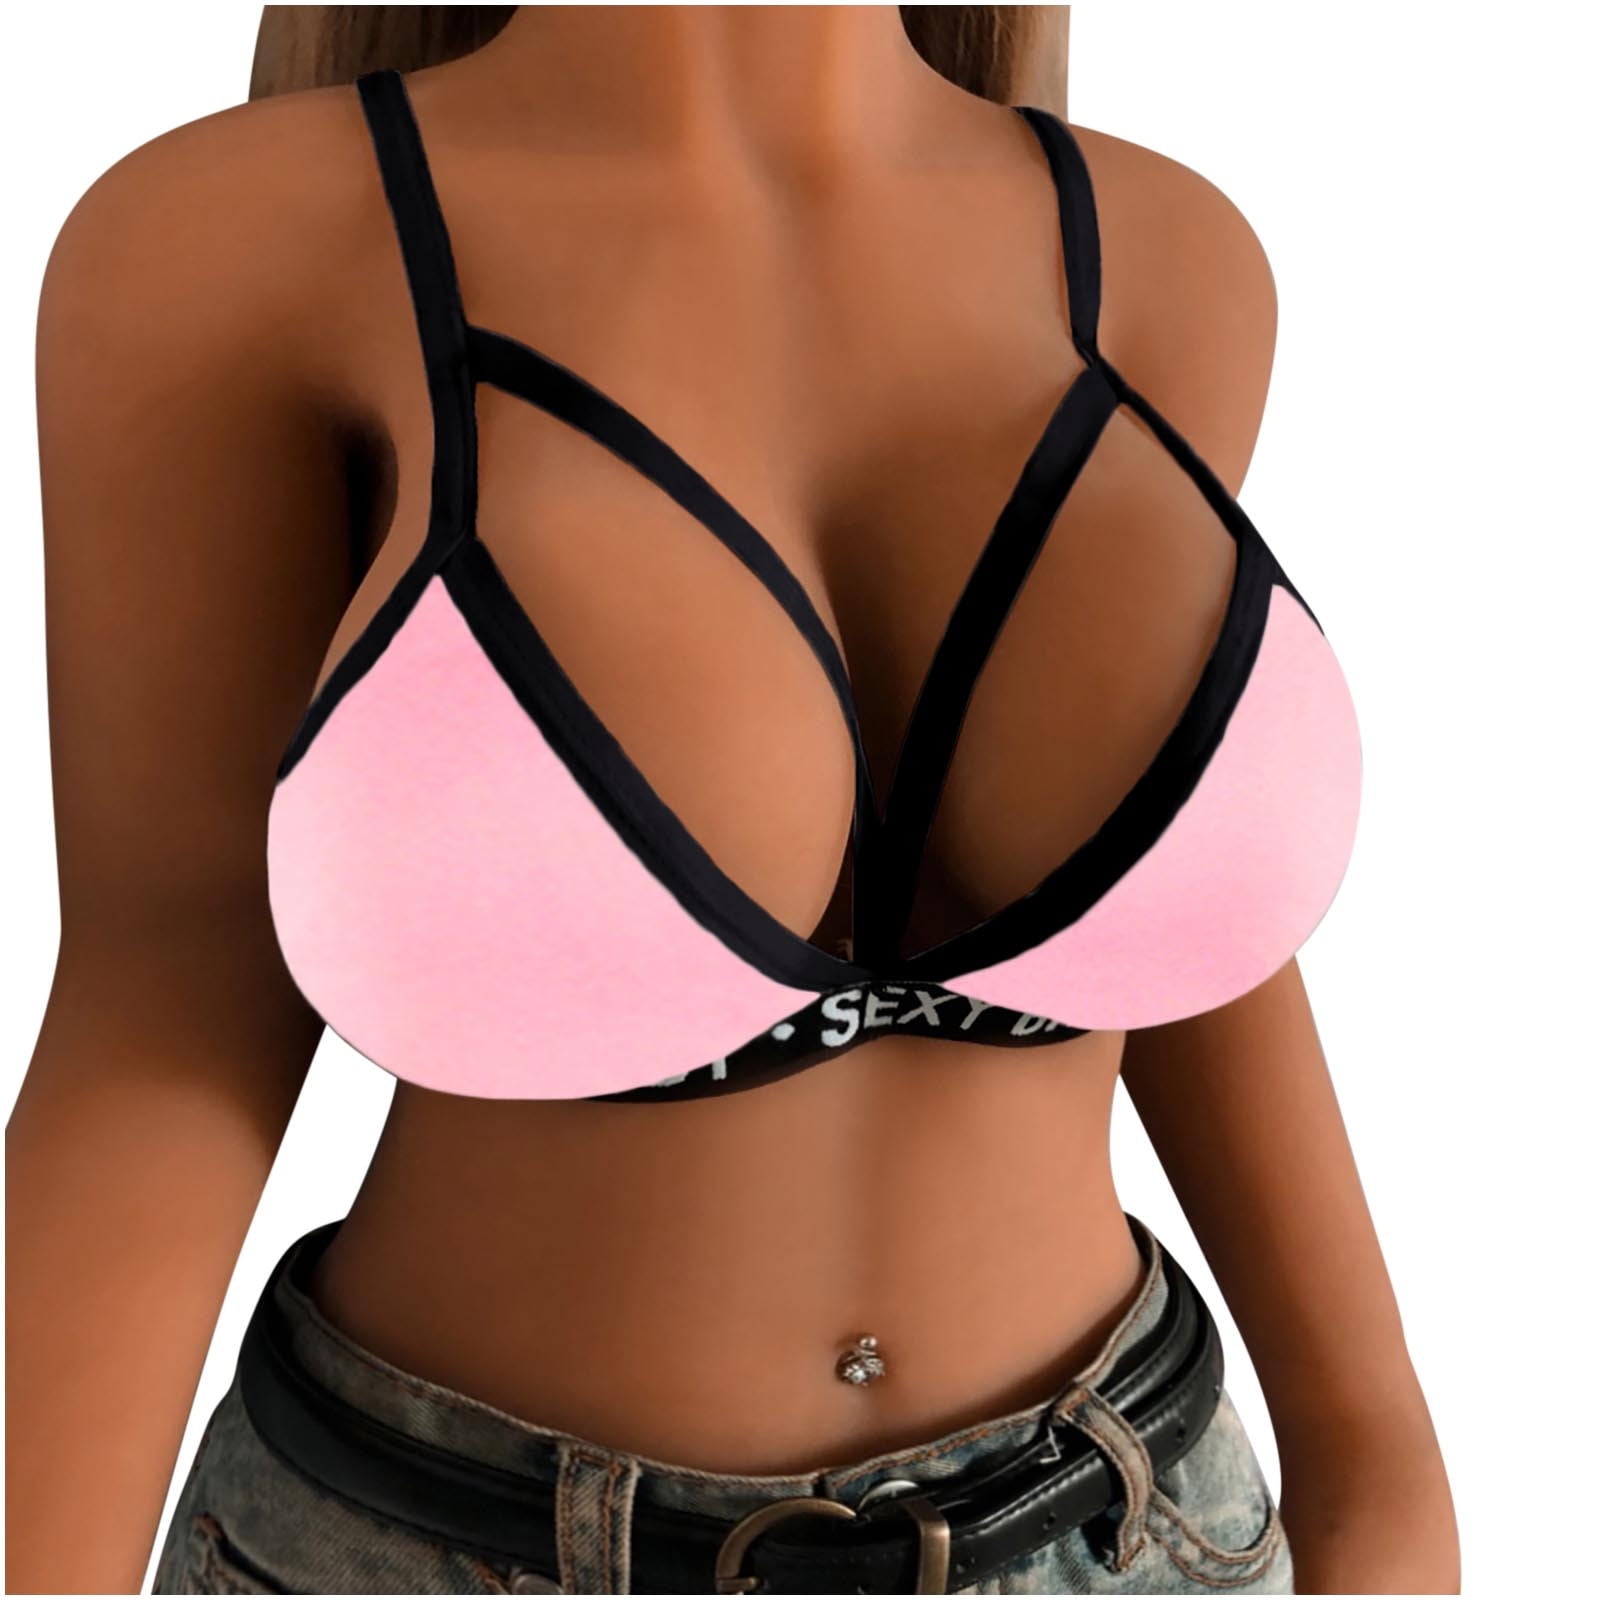 Lady's Corset - 😍 Cage Demi Bra 😍 by Lady's Corset starting at